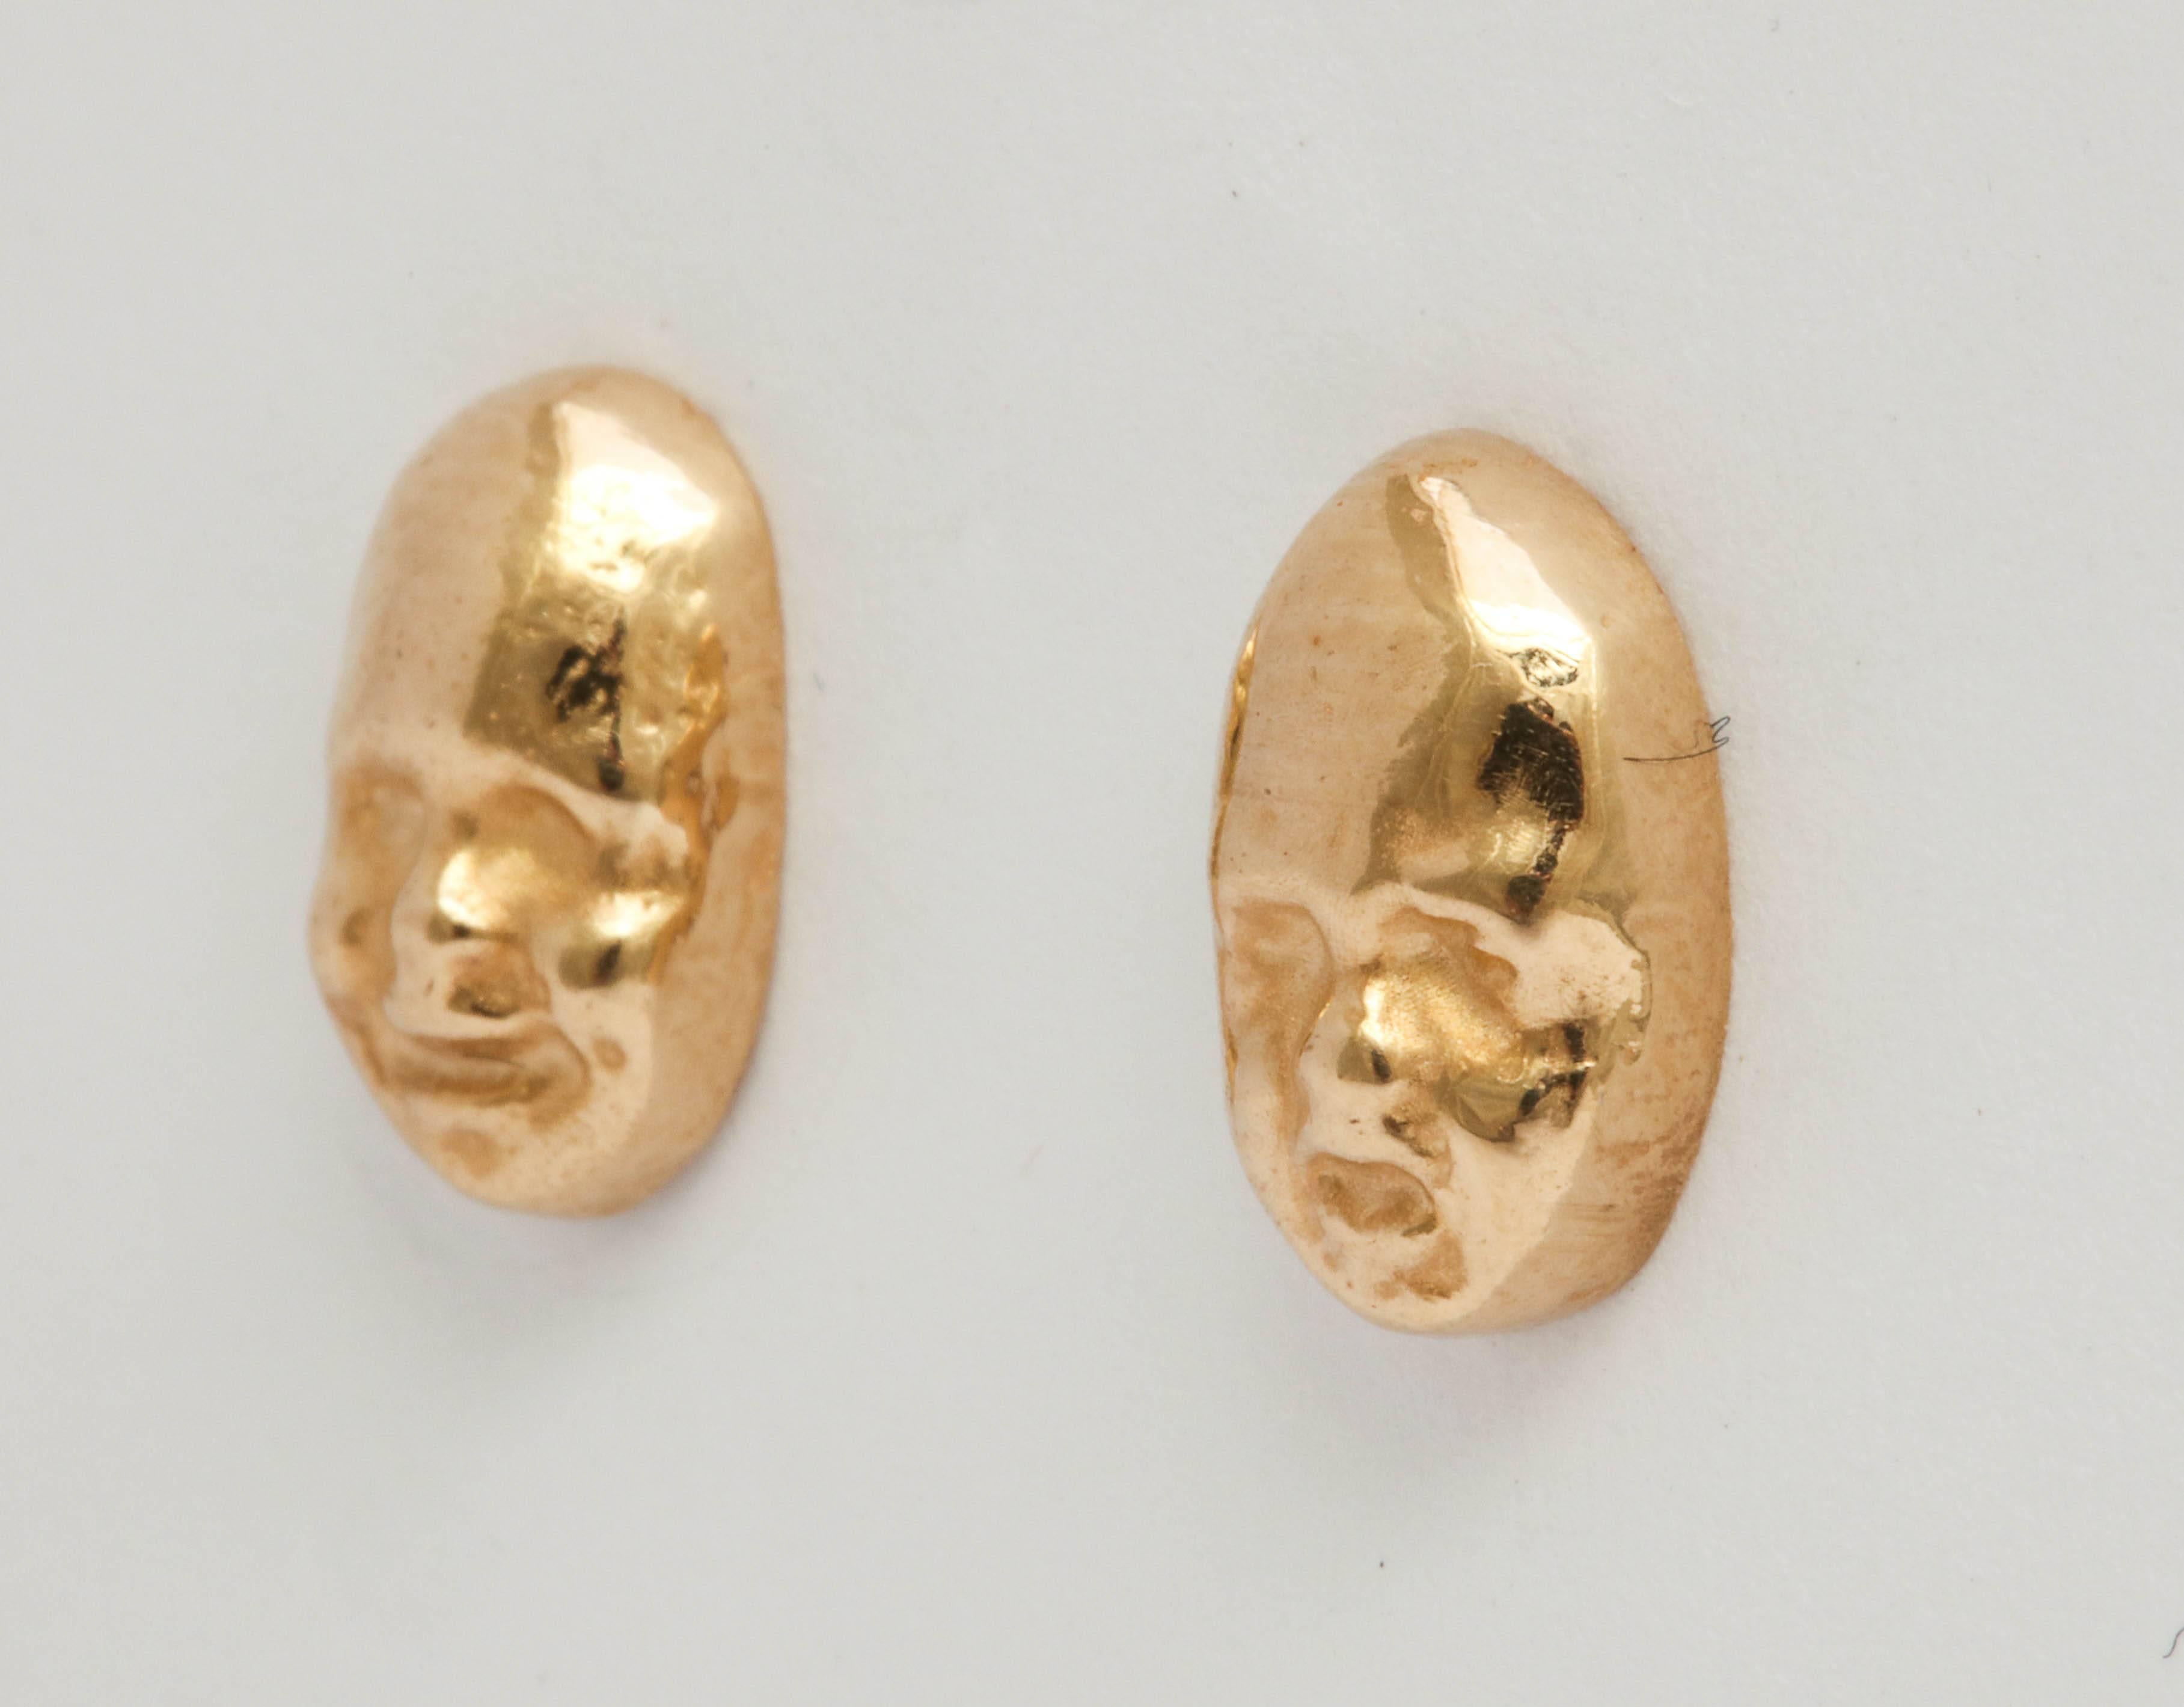 Pair of Tragedy and Comedy Masks earrings in polished 14k yellow gold, mounted on gold posts.  

21st century, or contemporary.

Masks measure ½ x ¼ x ¼ in. (1.3 x .6 x .6 cm.) (l x w x h)